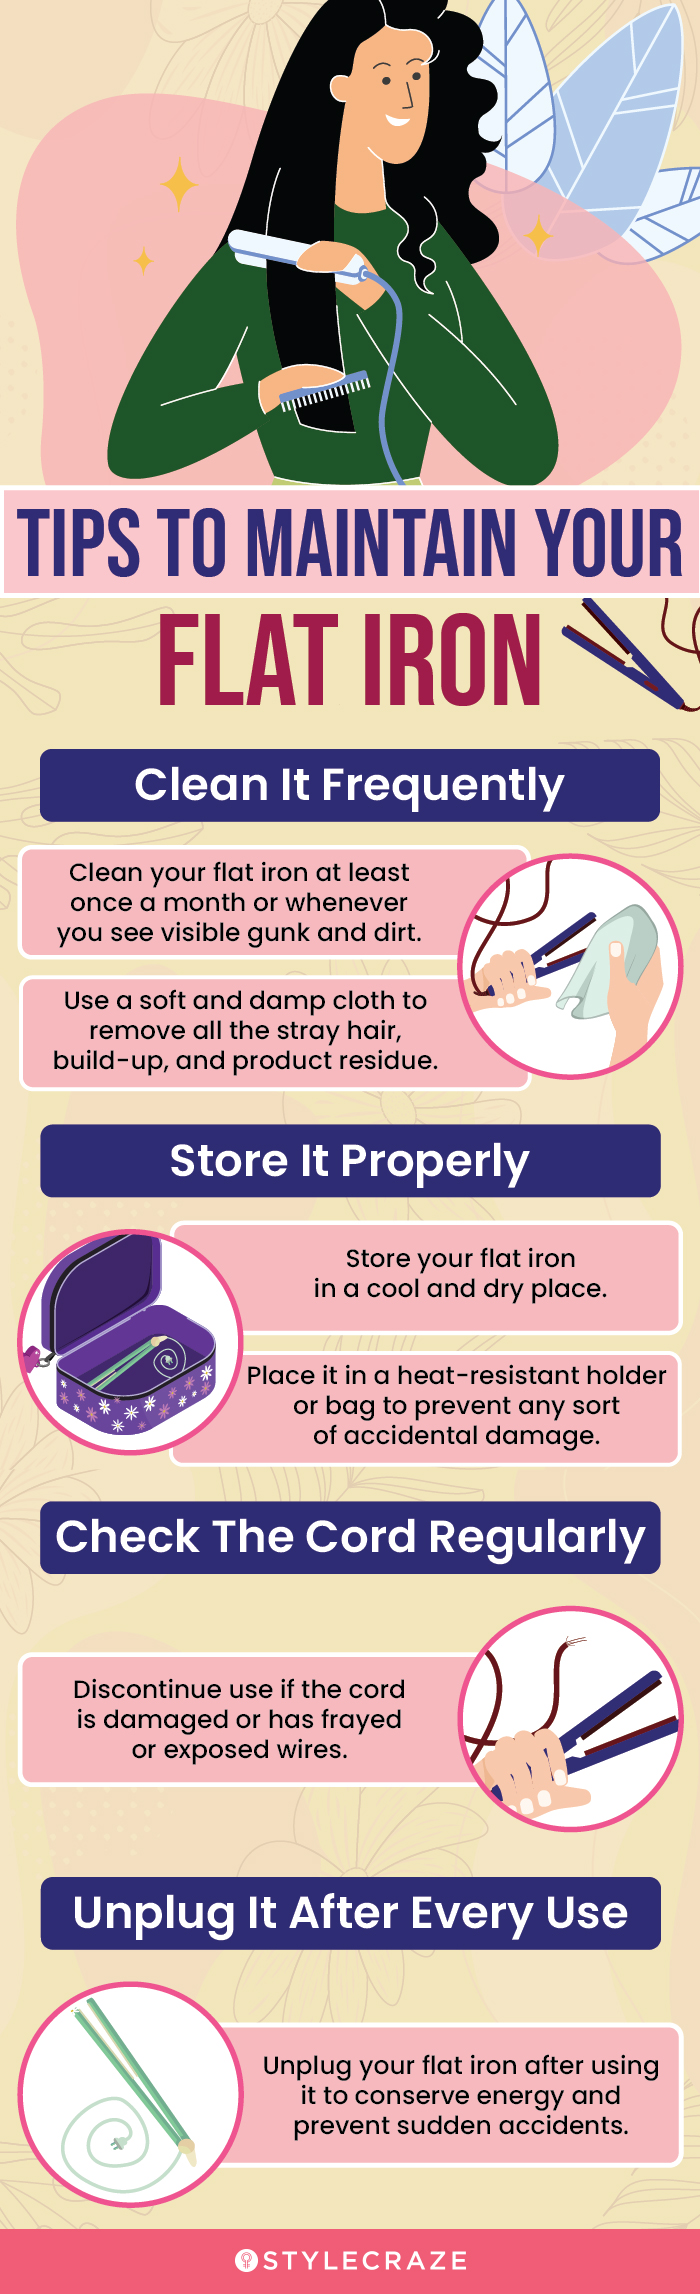 Tips To Maintain Your Flat Iron (infographic)